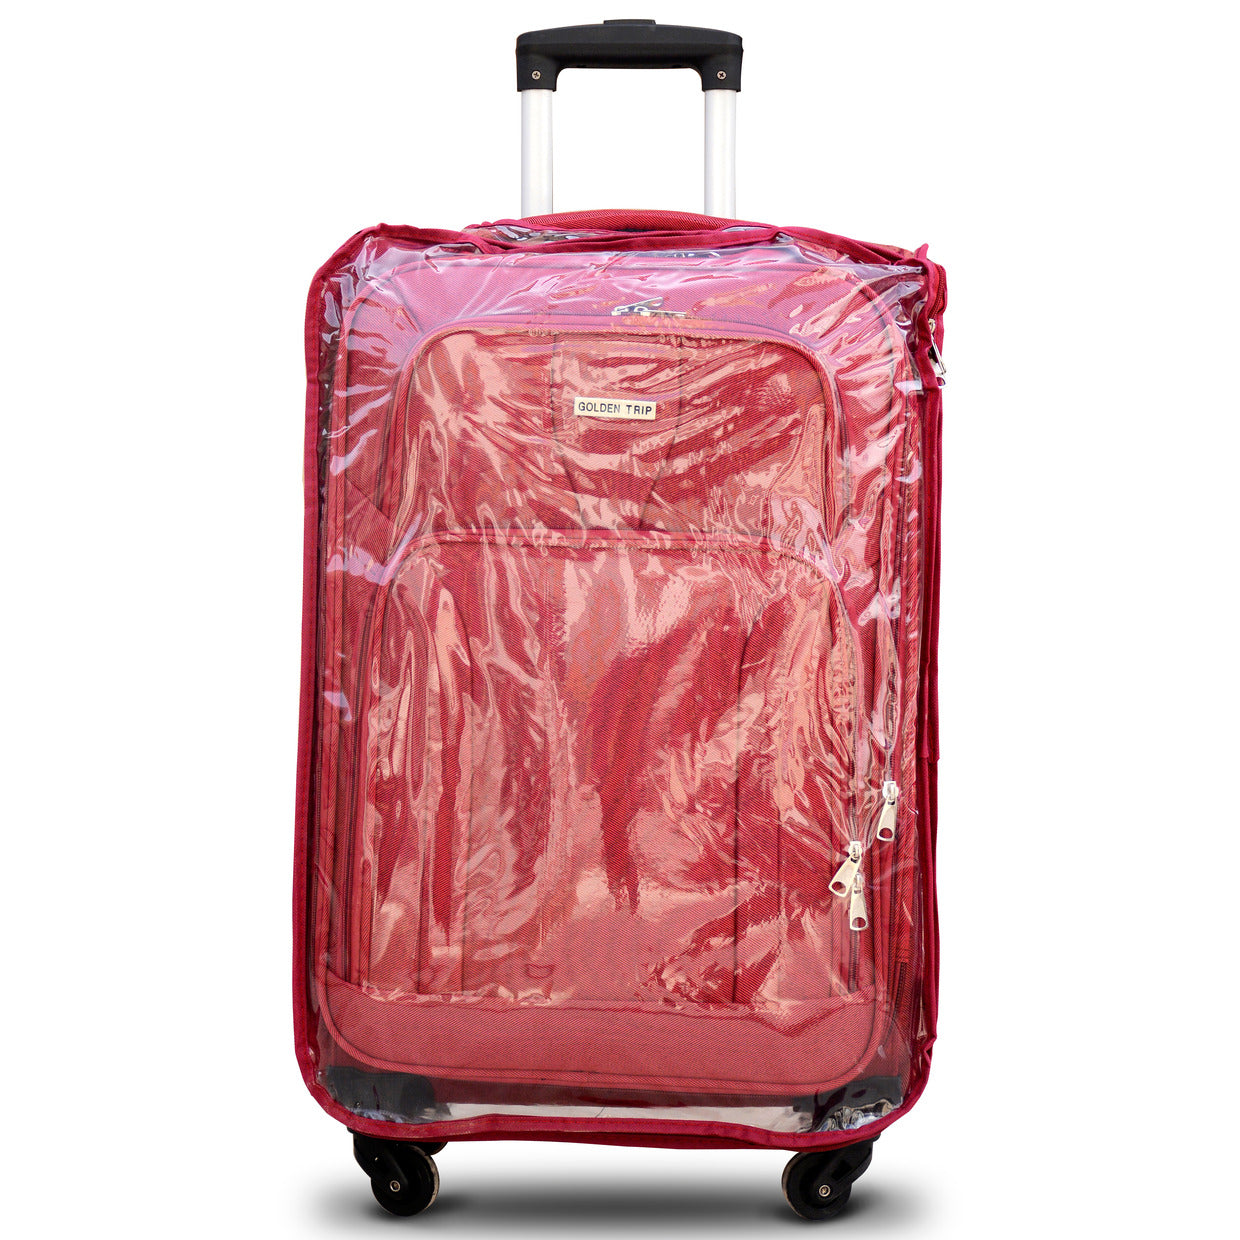 , best quality premium luggage red with cover uae online shoping, ,premium luggage red with cover dubai price 10 kg,25 kg,35 kg,45 kg online zaappy, ,premium luggage red with cover emirates , best suitcase ,trolley baggage best quality,, best trolley seller uae premium luggage online near to me,quality suitcase online with cover ,zaappi,zappy,zapi,zaapy